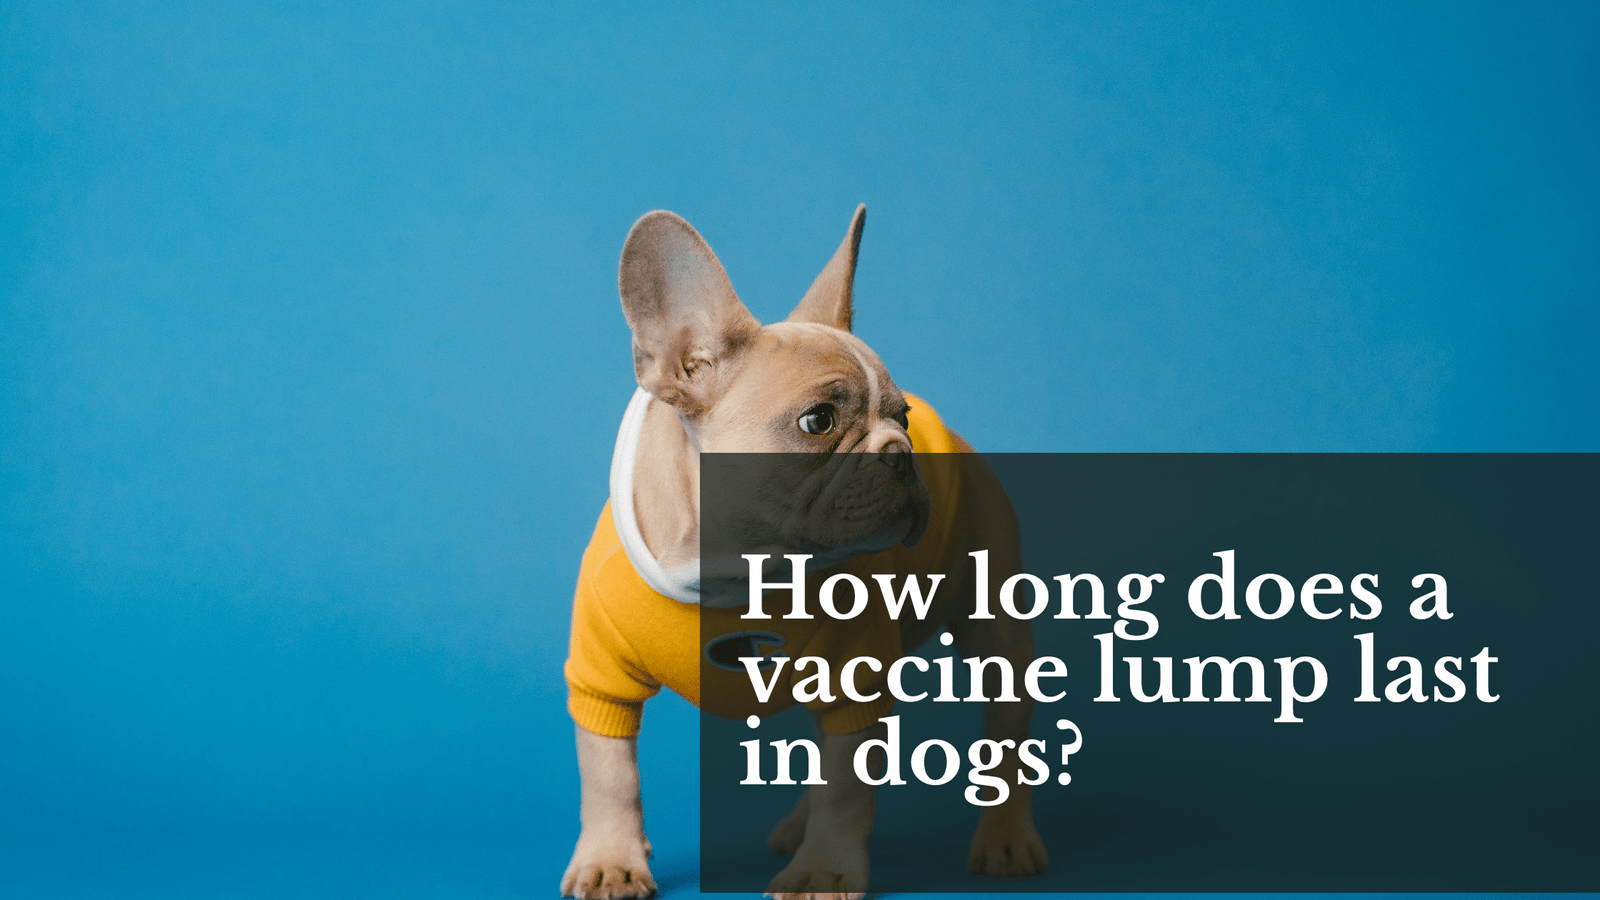 how long does a vaccine lump last in dogs